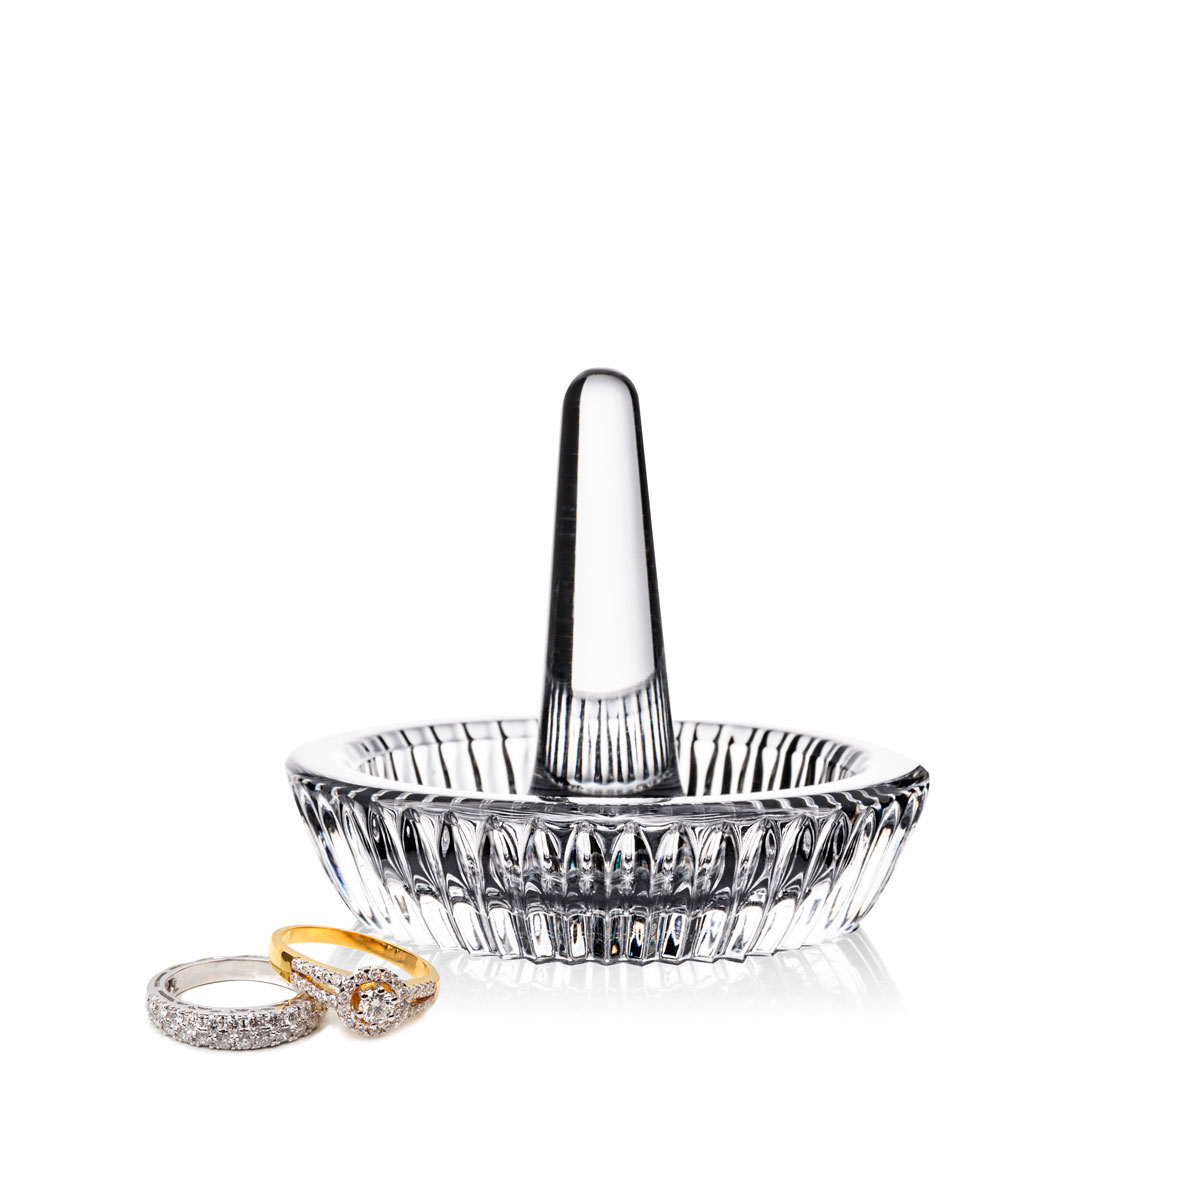 Waterford Crystal Round Ring Holder